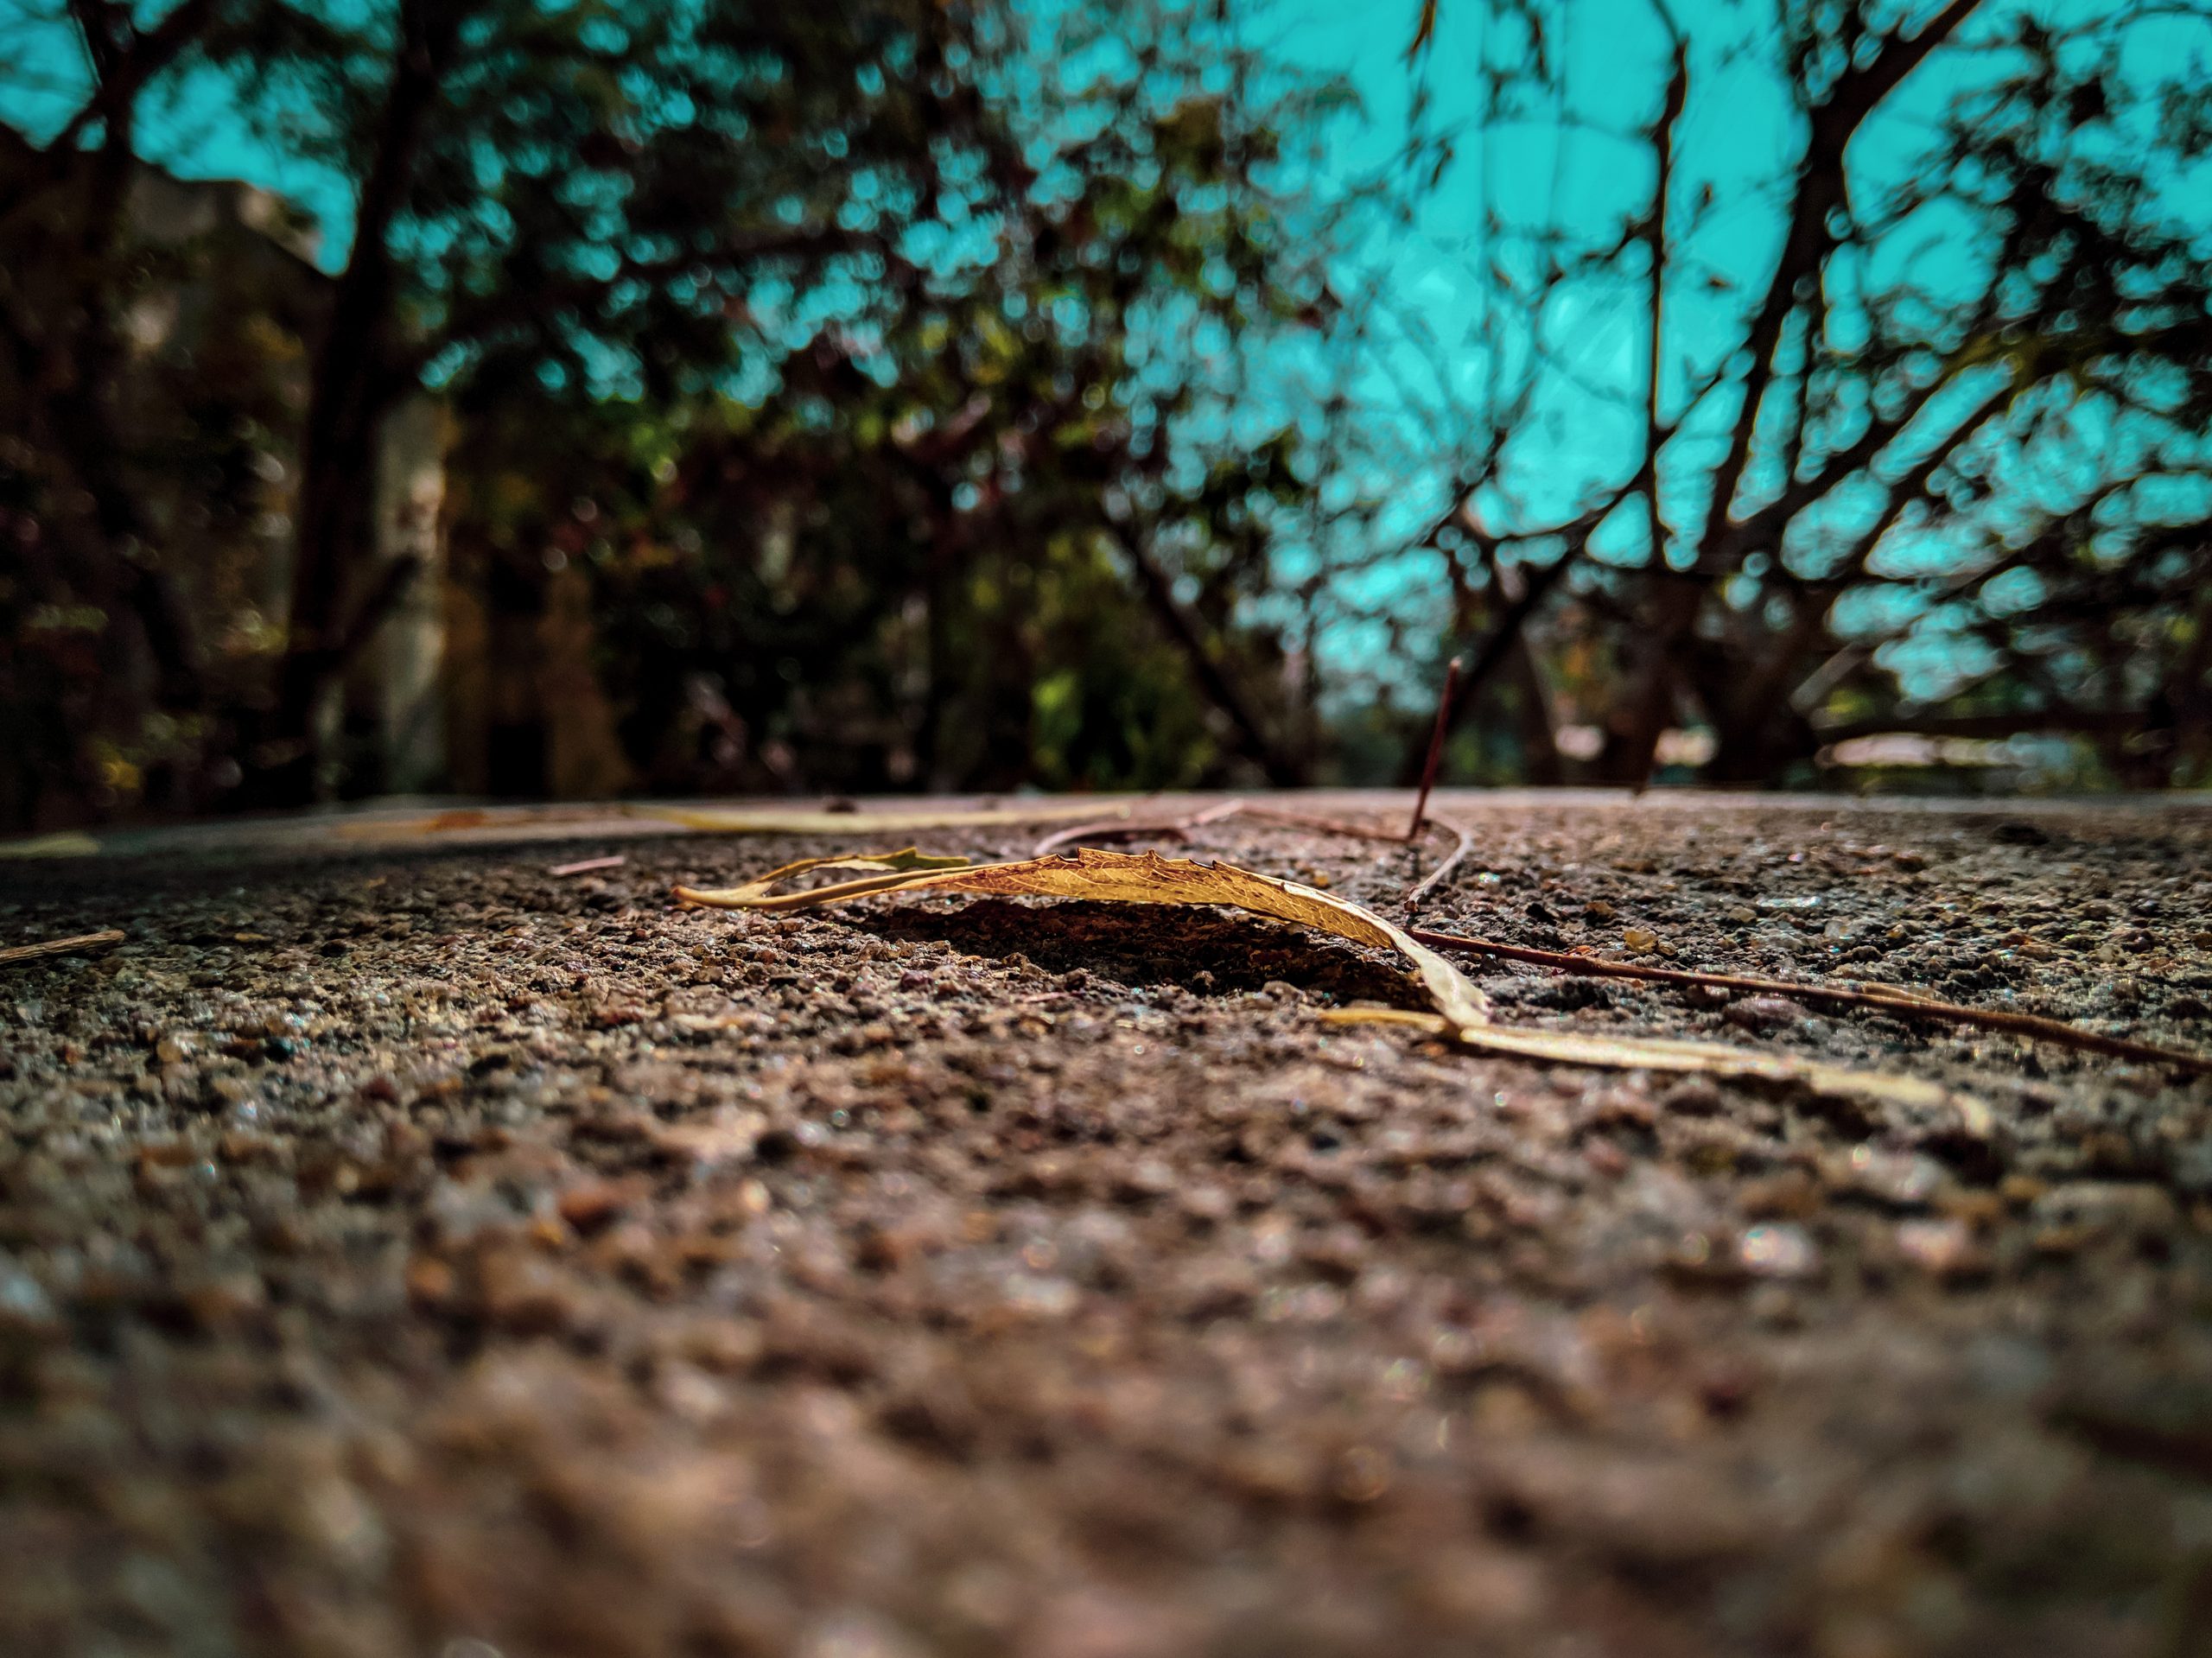 A dry leaf on a road surface